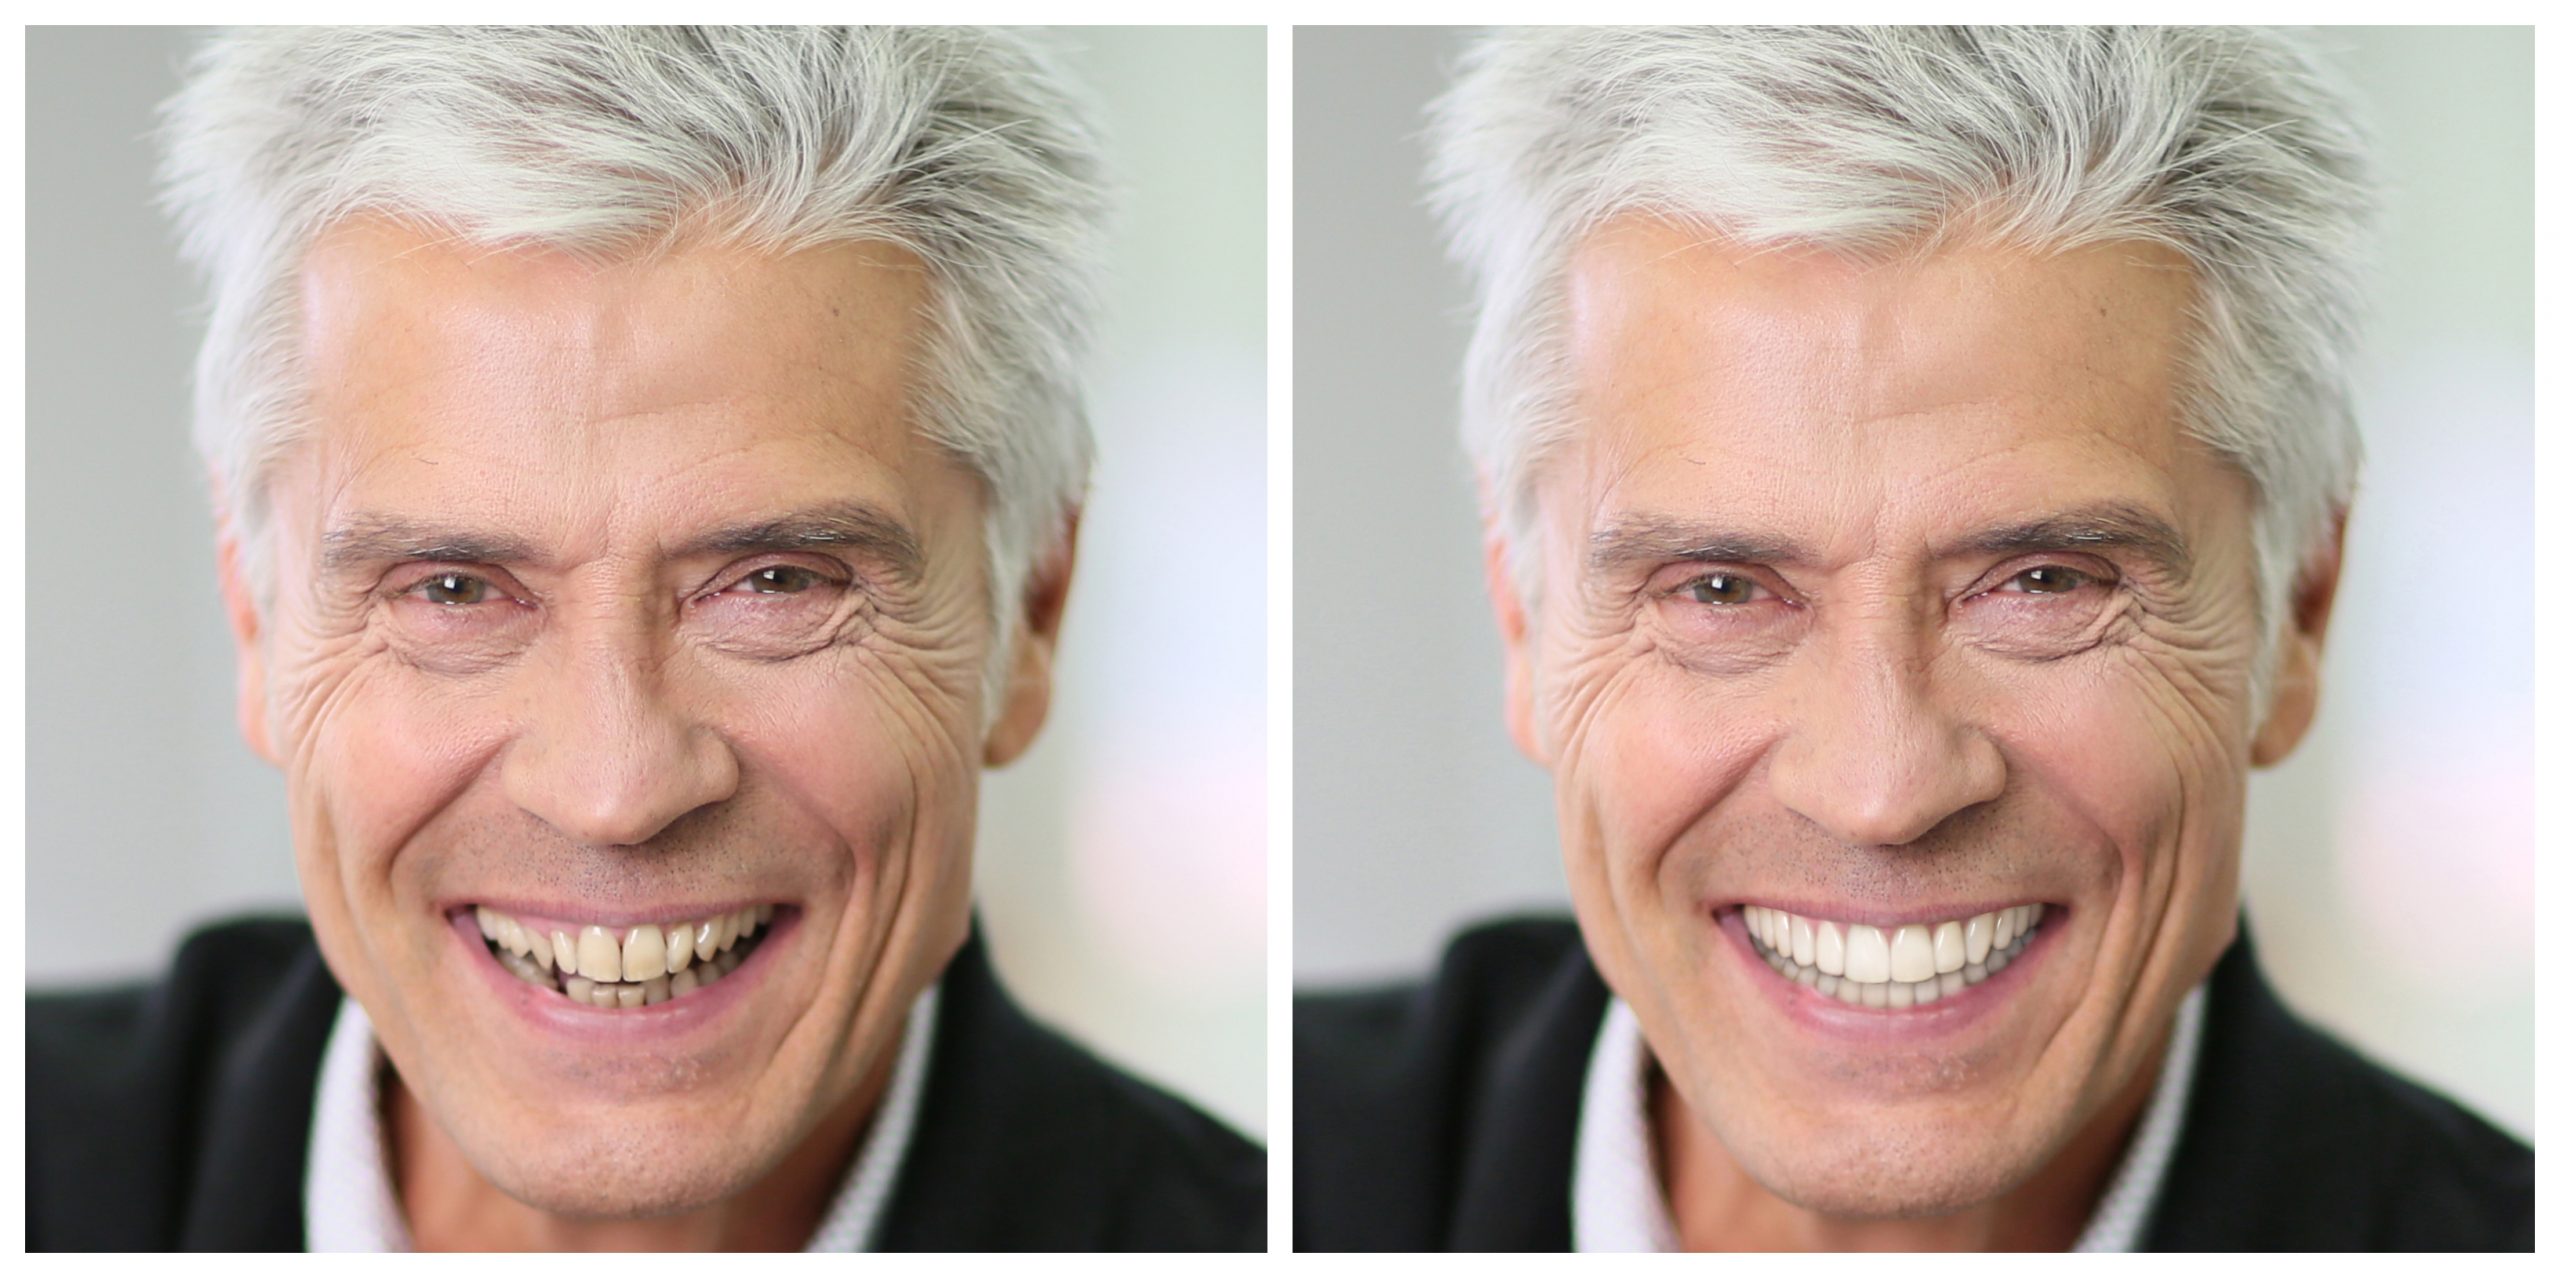 Smile Restoration - Before and After27